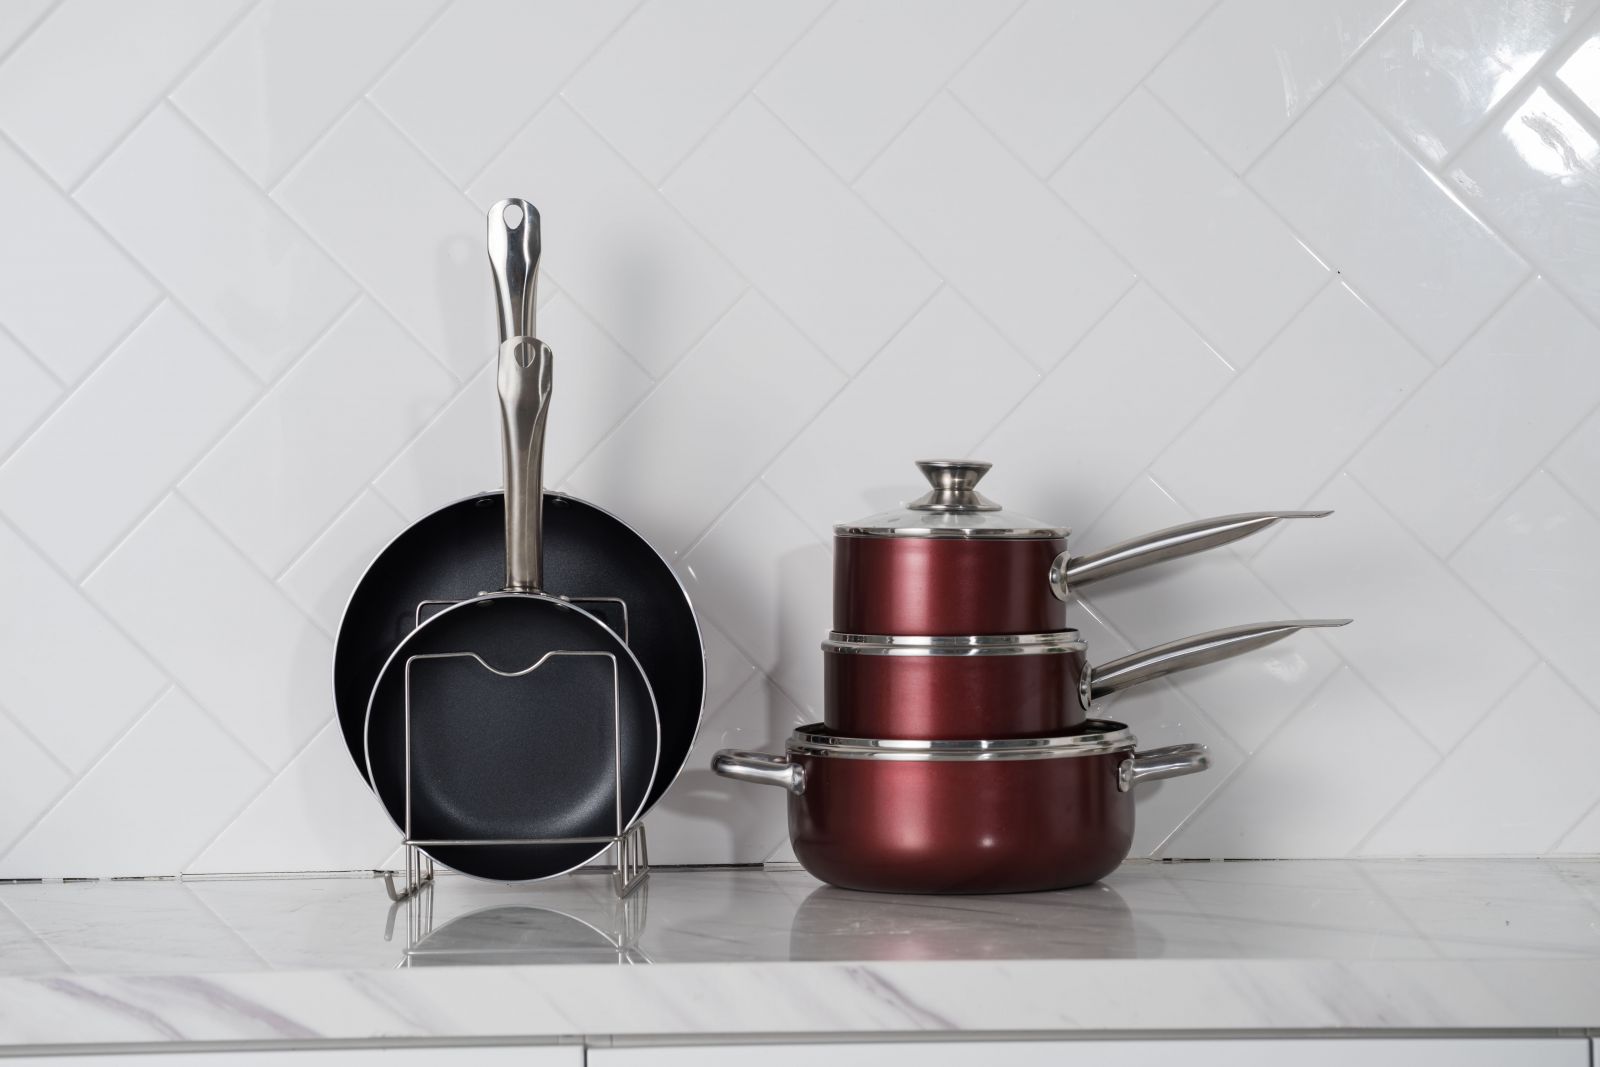 Find all the best Black Friday cookware deals at Kohl's! 